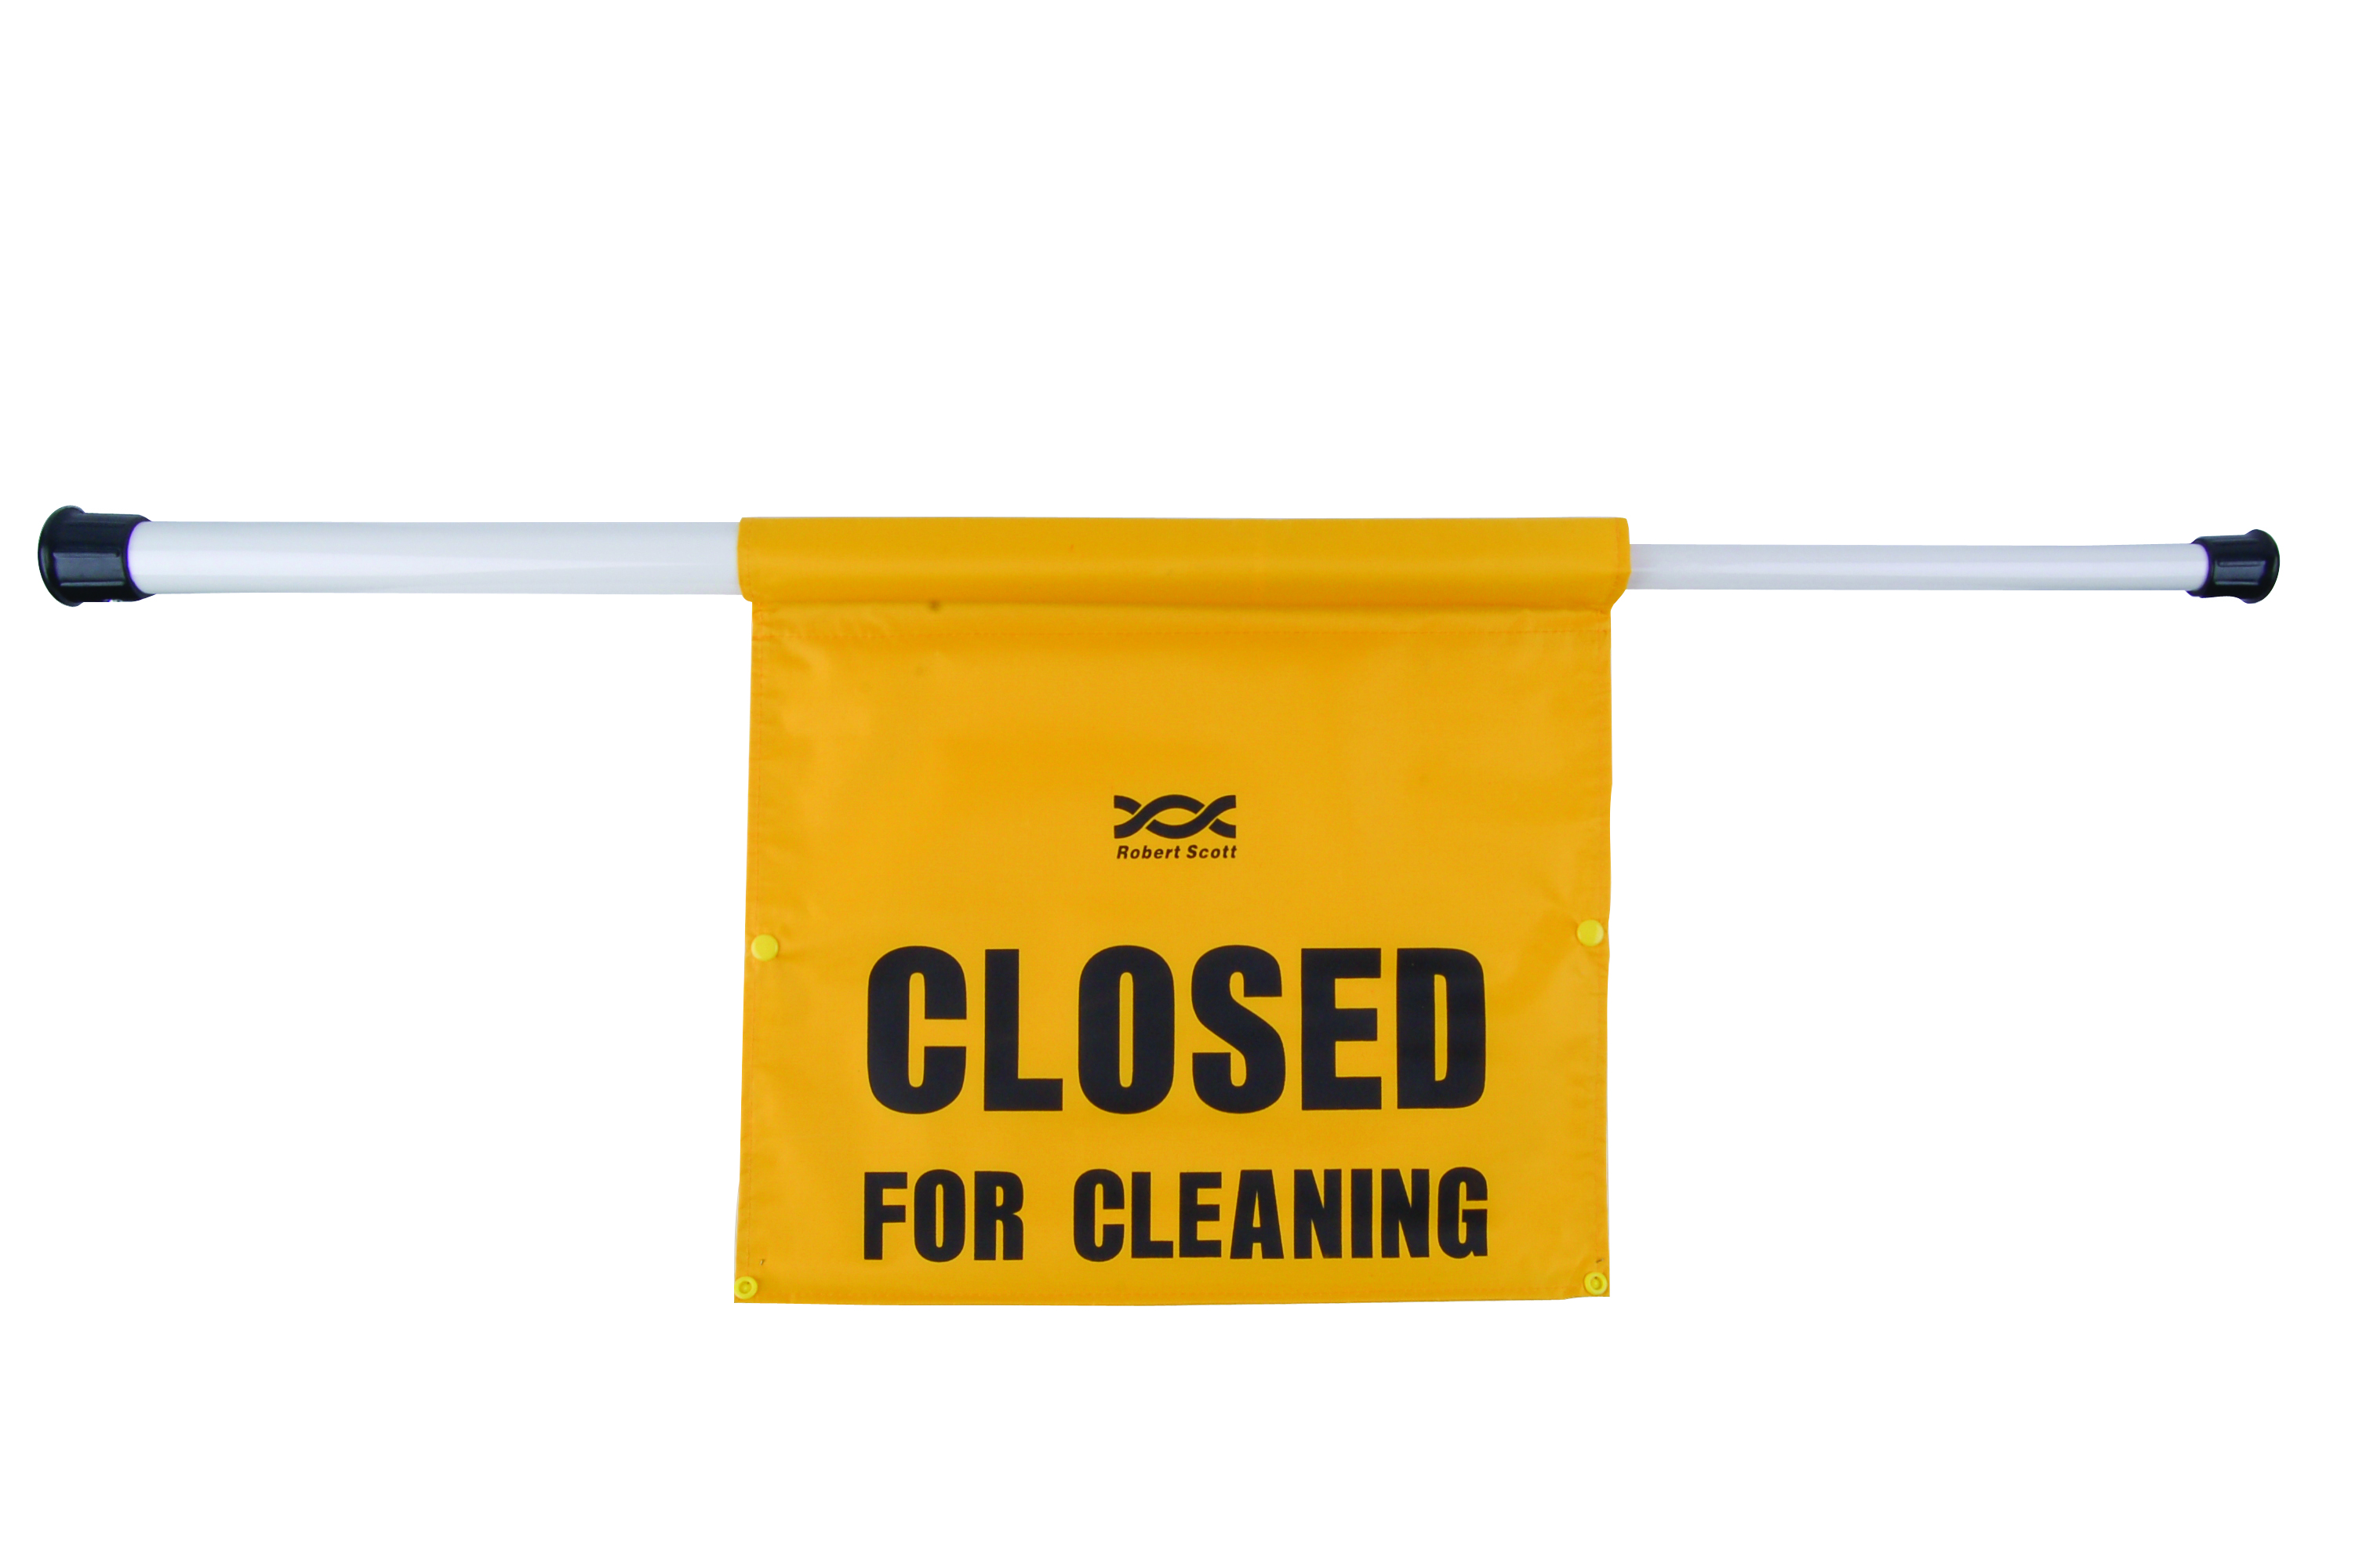 Hanging Closed For Cleaning Sign